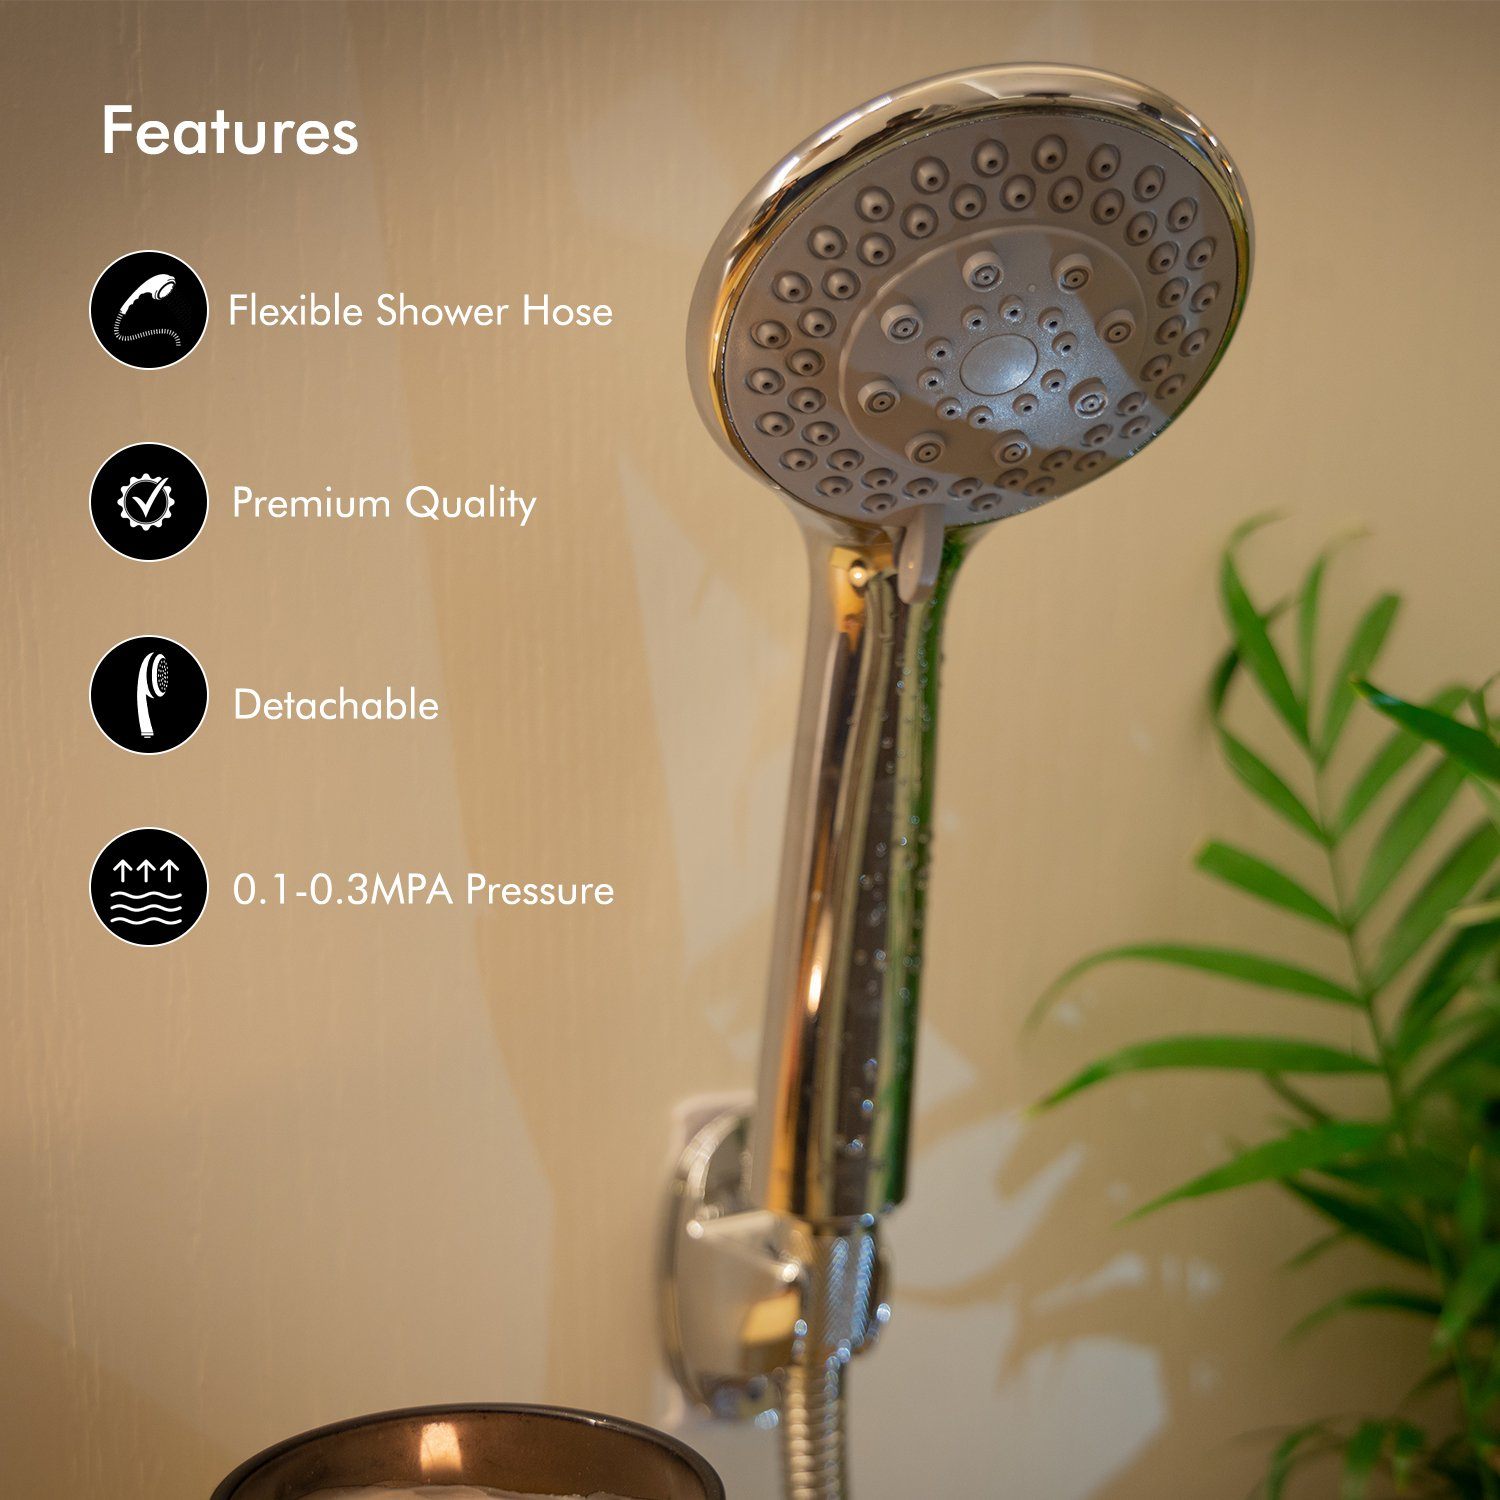 High Pressure Shower Head, 5 Function Hand Shower Bathroom Fixtures Geepas | For you. For life. 